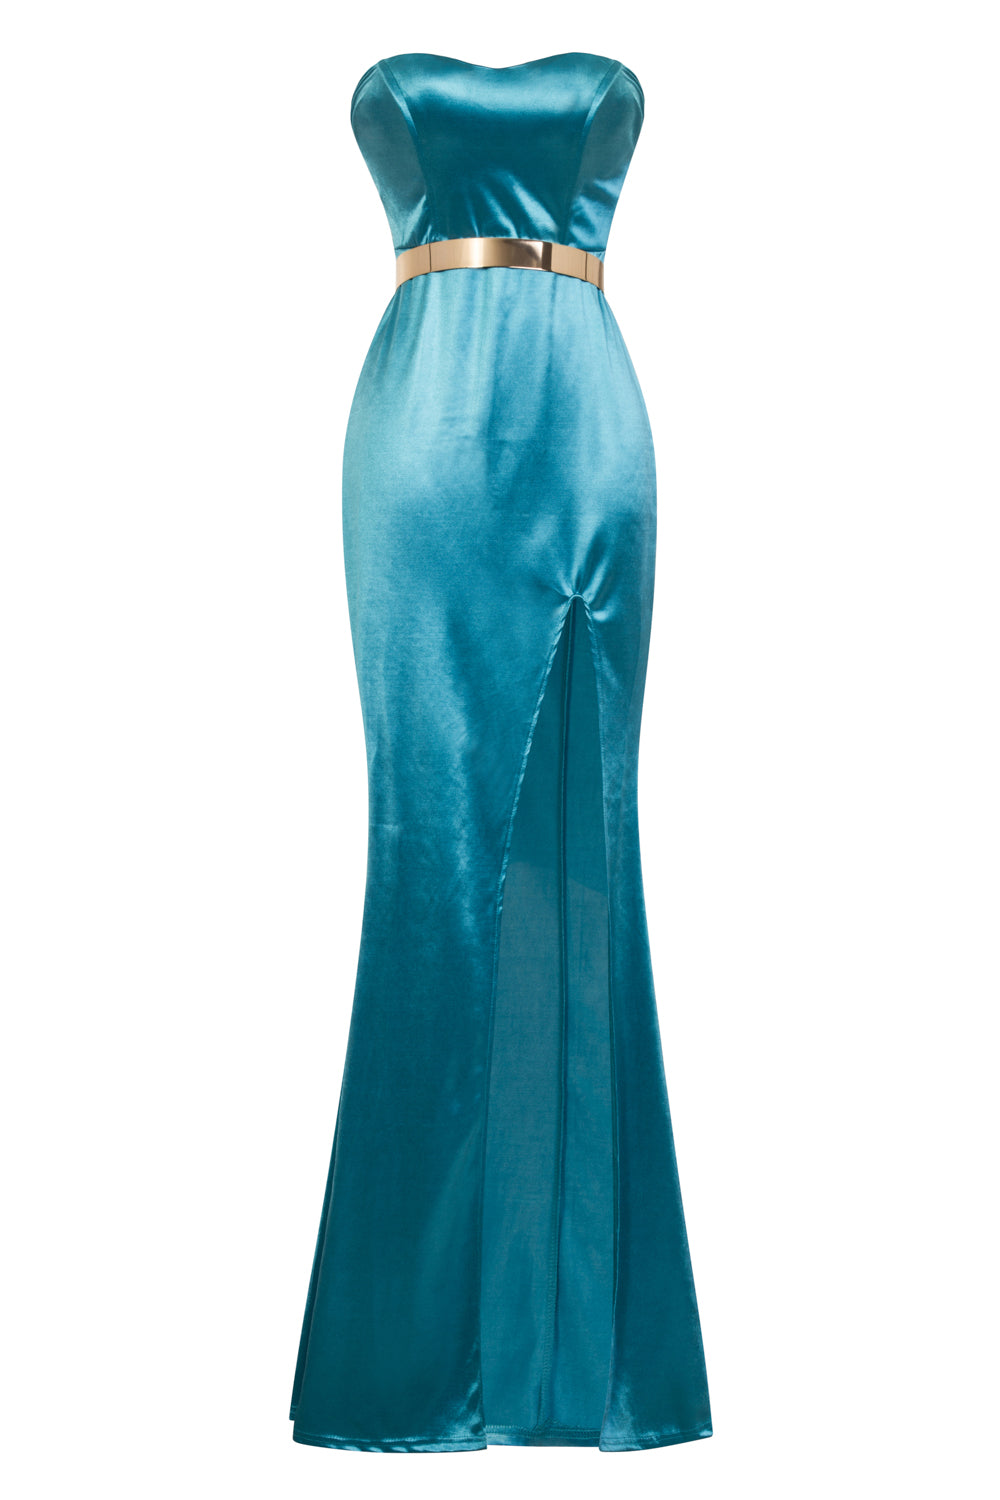 Versace Turquoise Gold Belted Slinky Satin Thigh Slit Maxi Dress